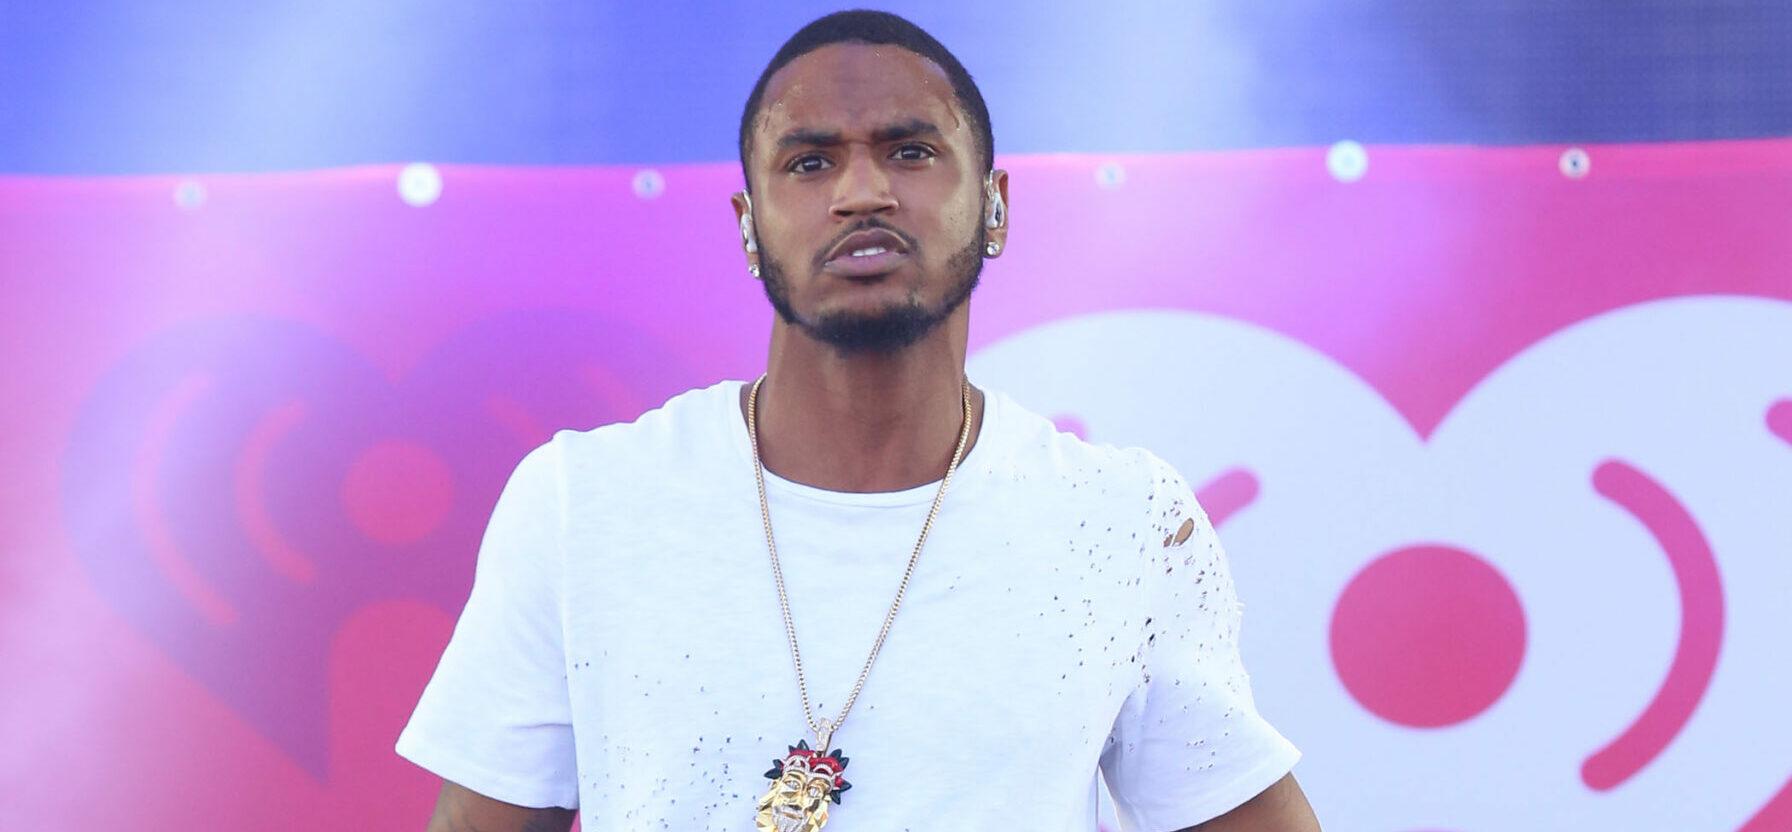 Trey Songz Hit With Sexual Assault Lawsuit For Allegedly Groping And Exposing A Woman’s Breast